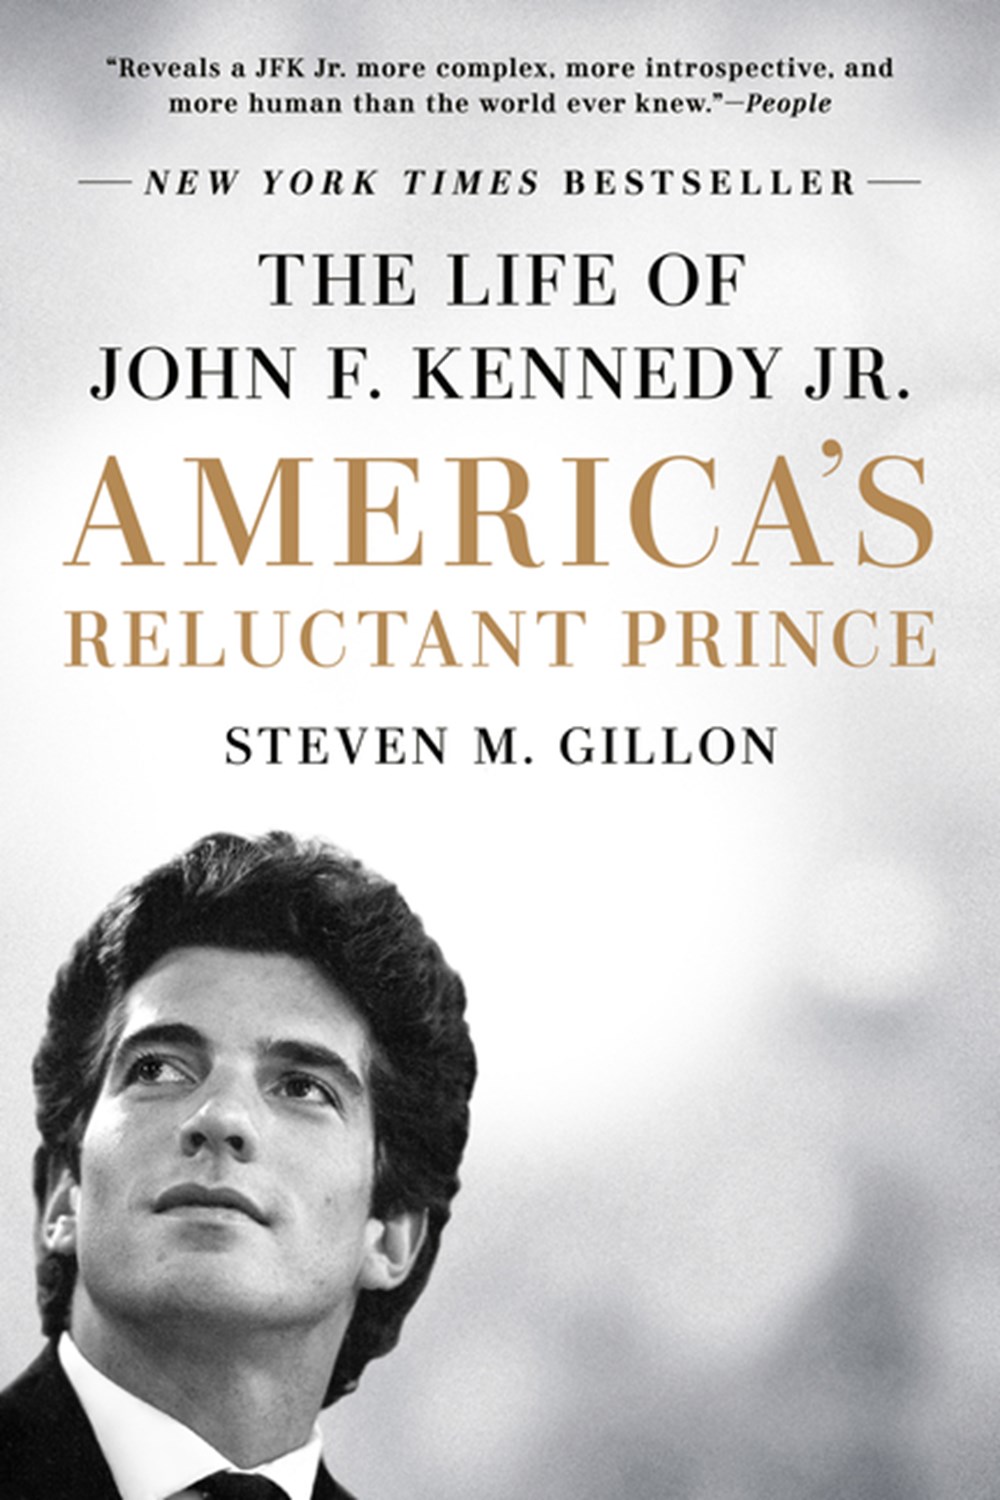 America's Reluctant Prince The Life of John F. Kennedy Jr.